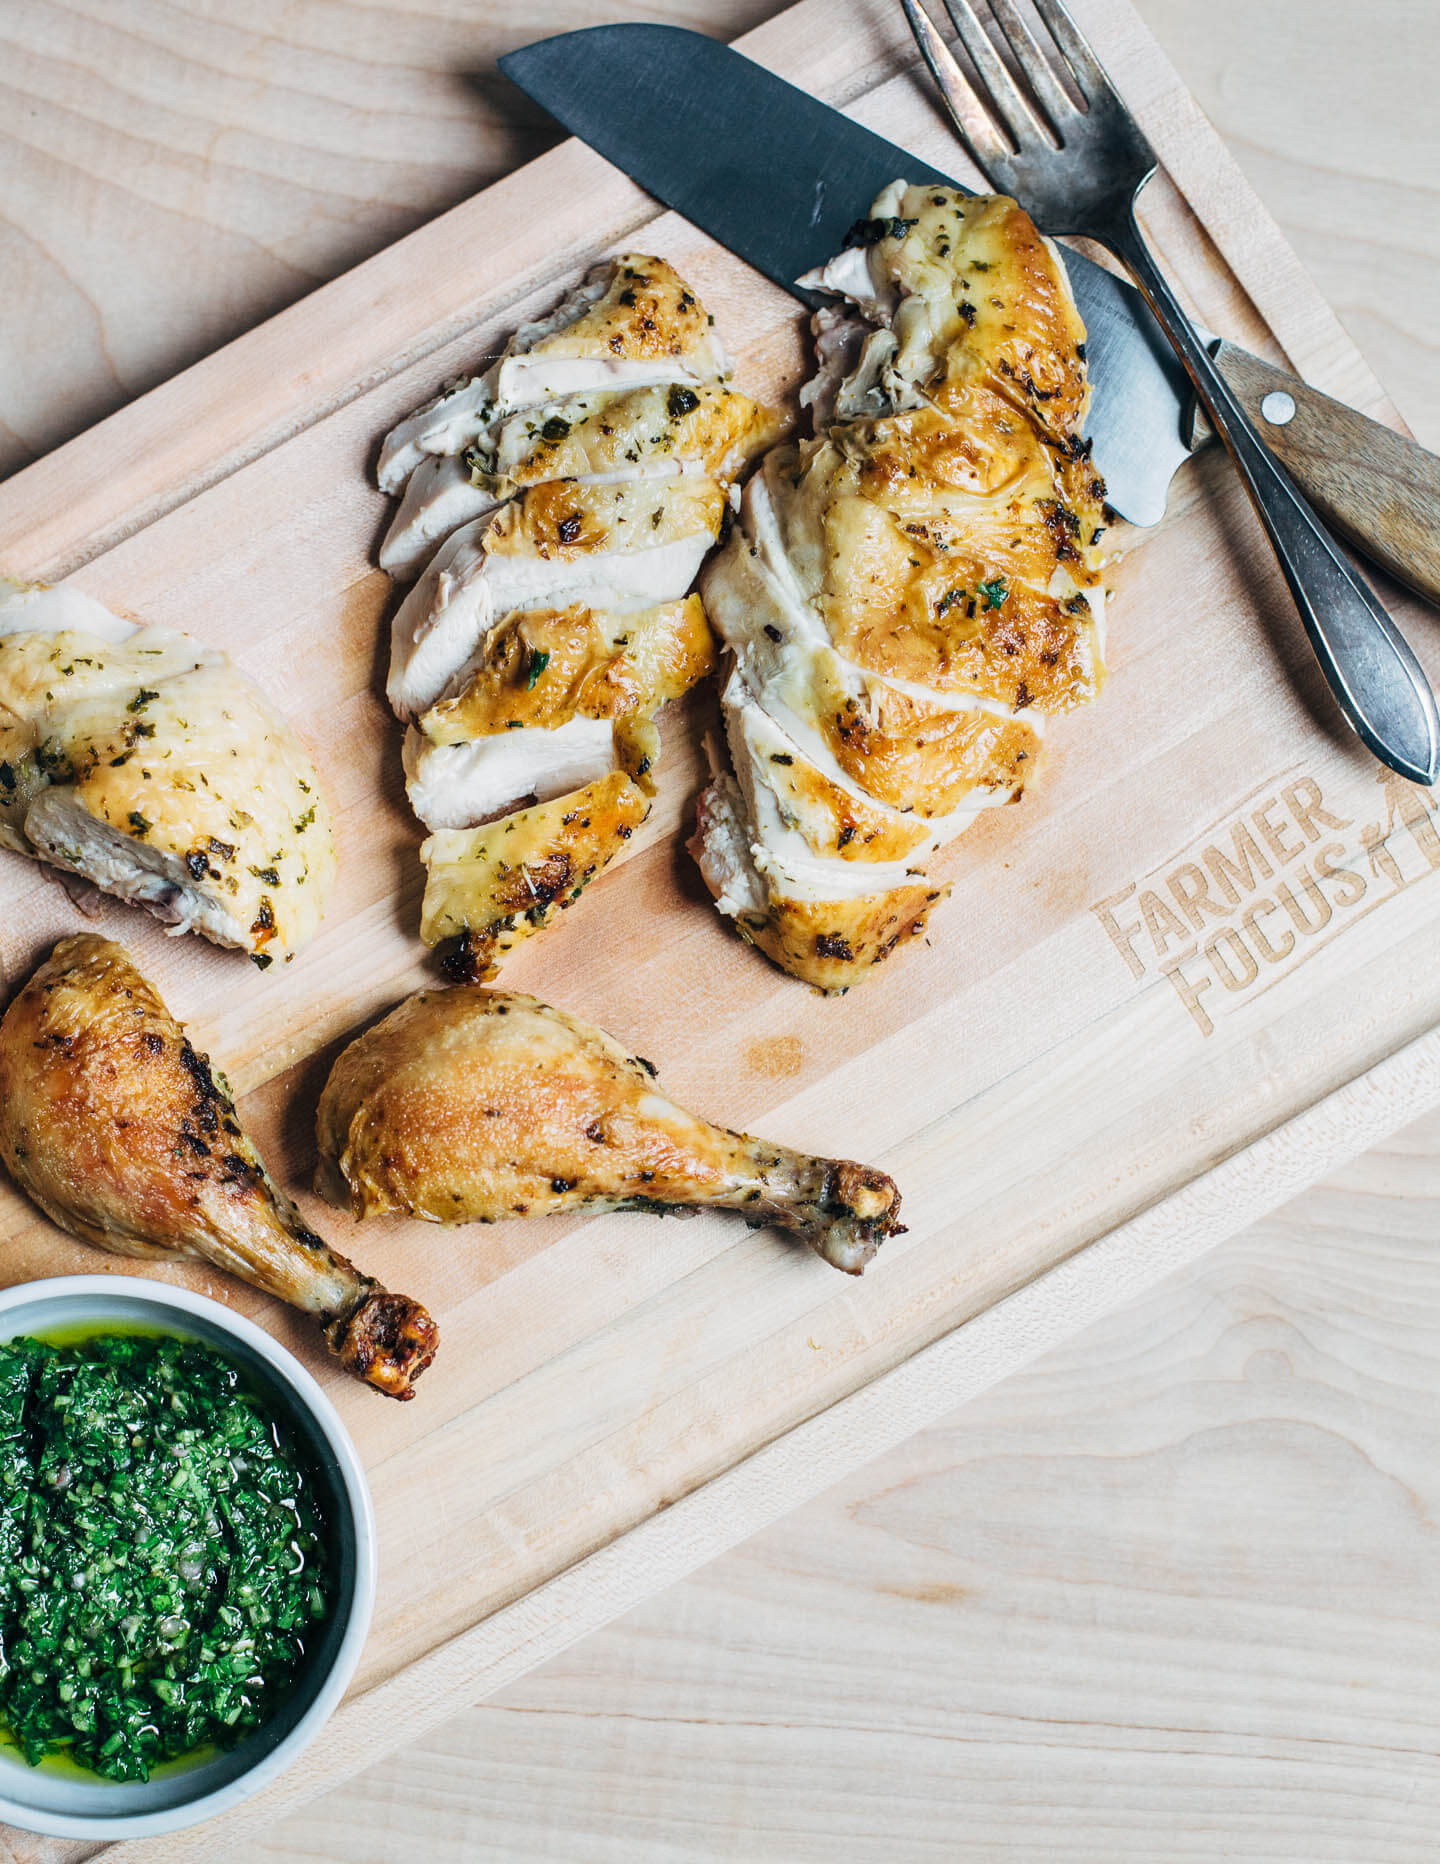 Carving a whole roasted chimichurri chicken.